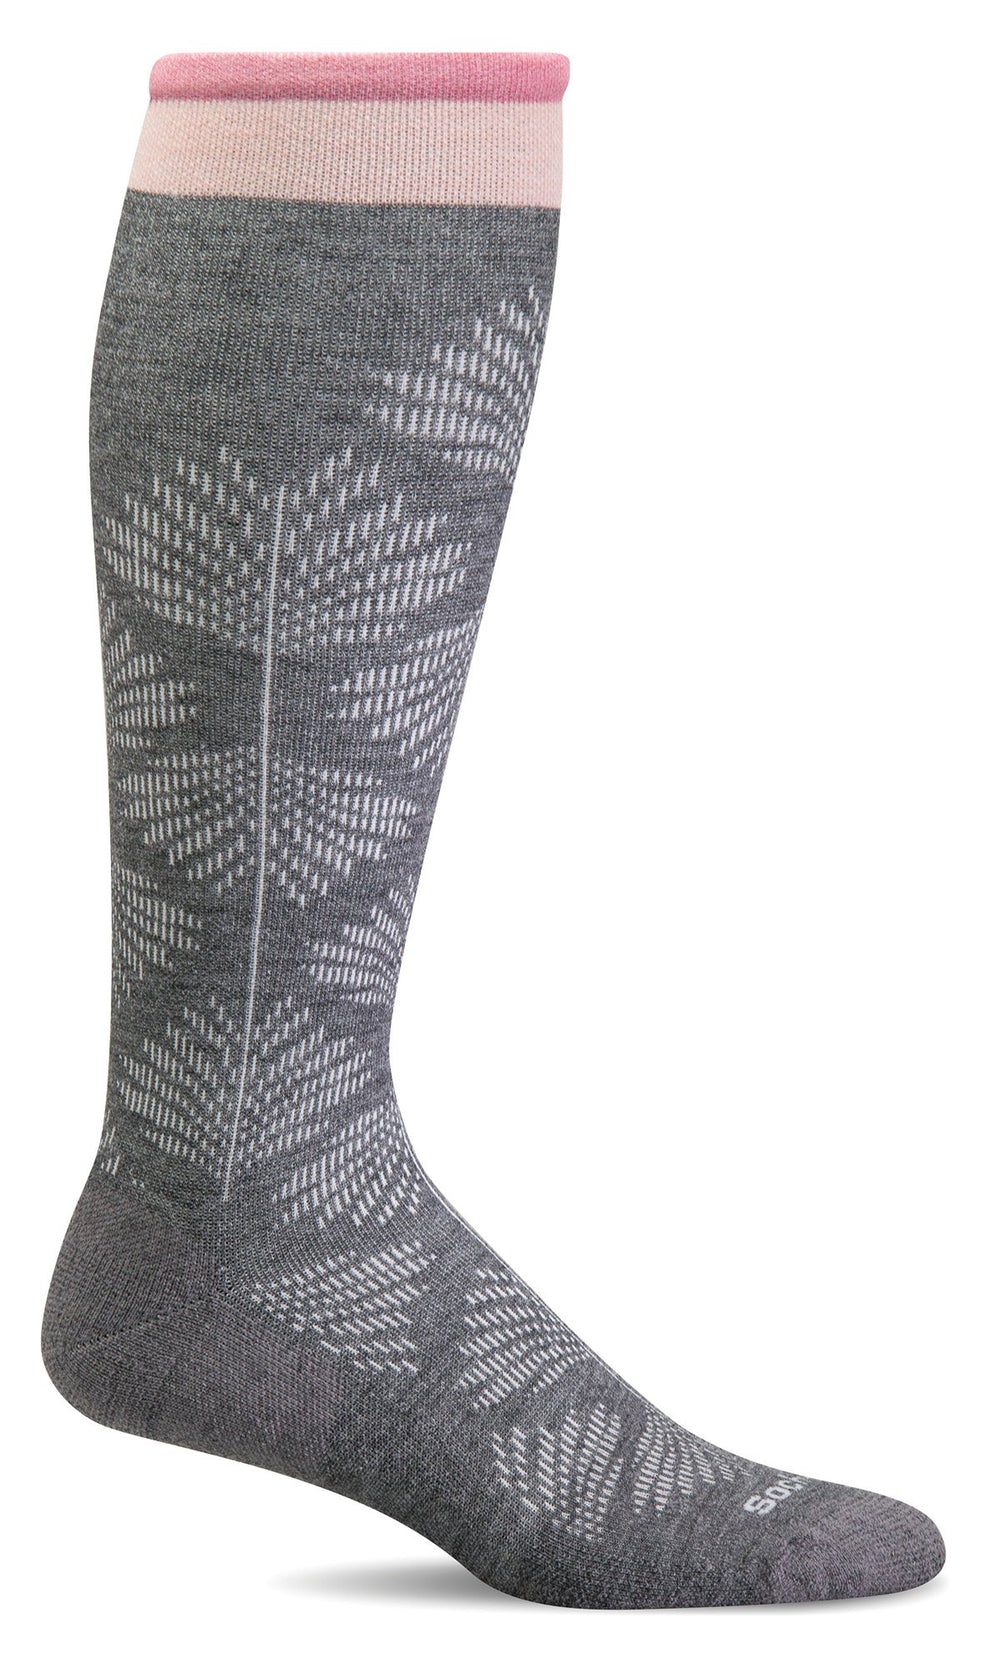 Sockwell Women's Compression Socks - WIDE CALF floral charcoal